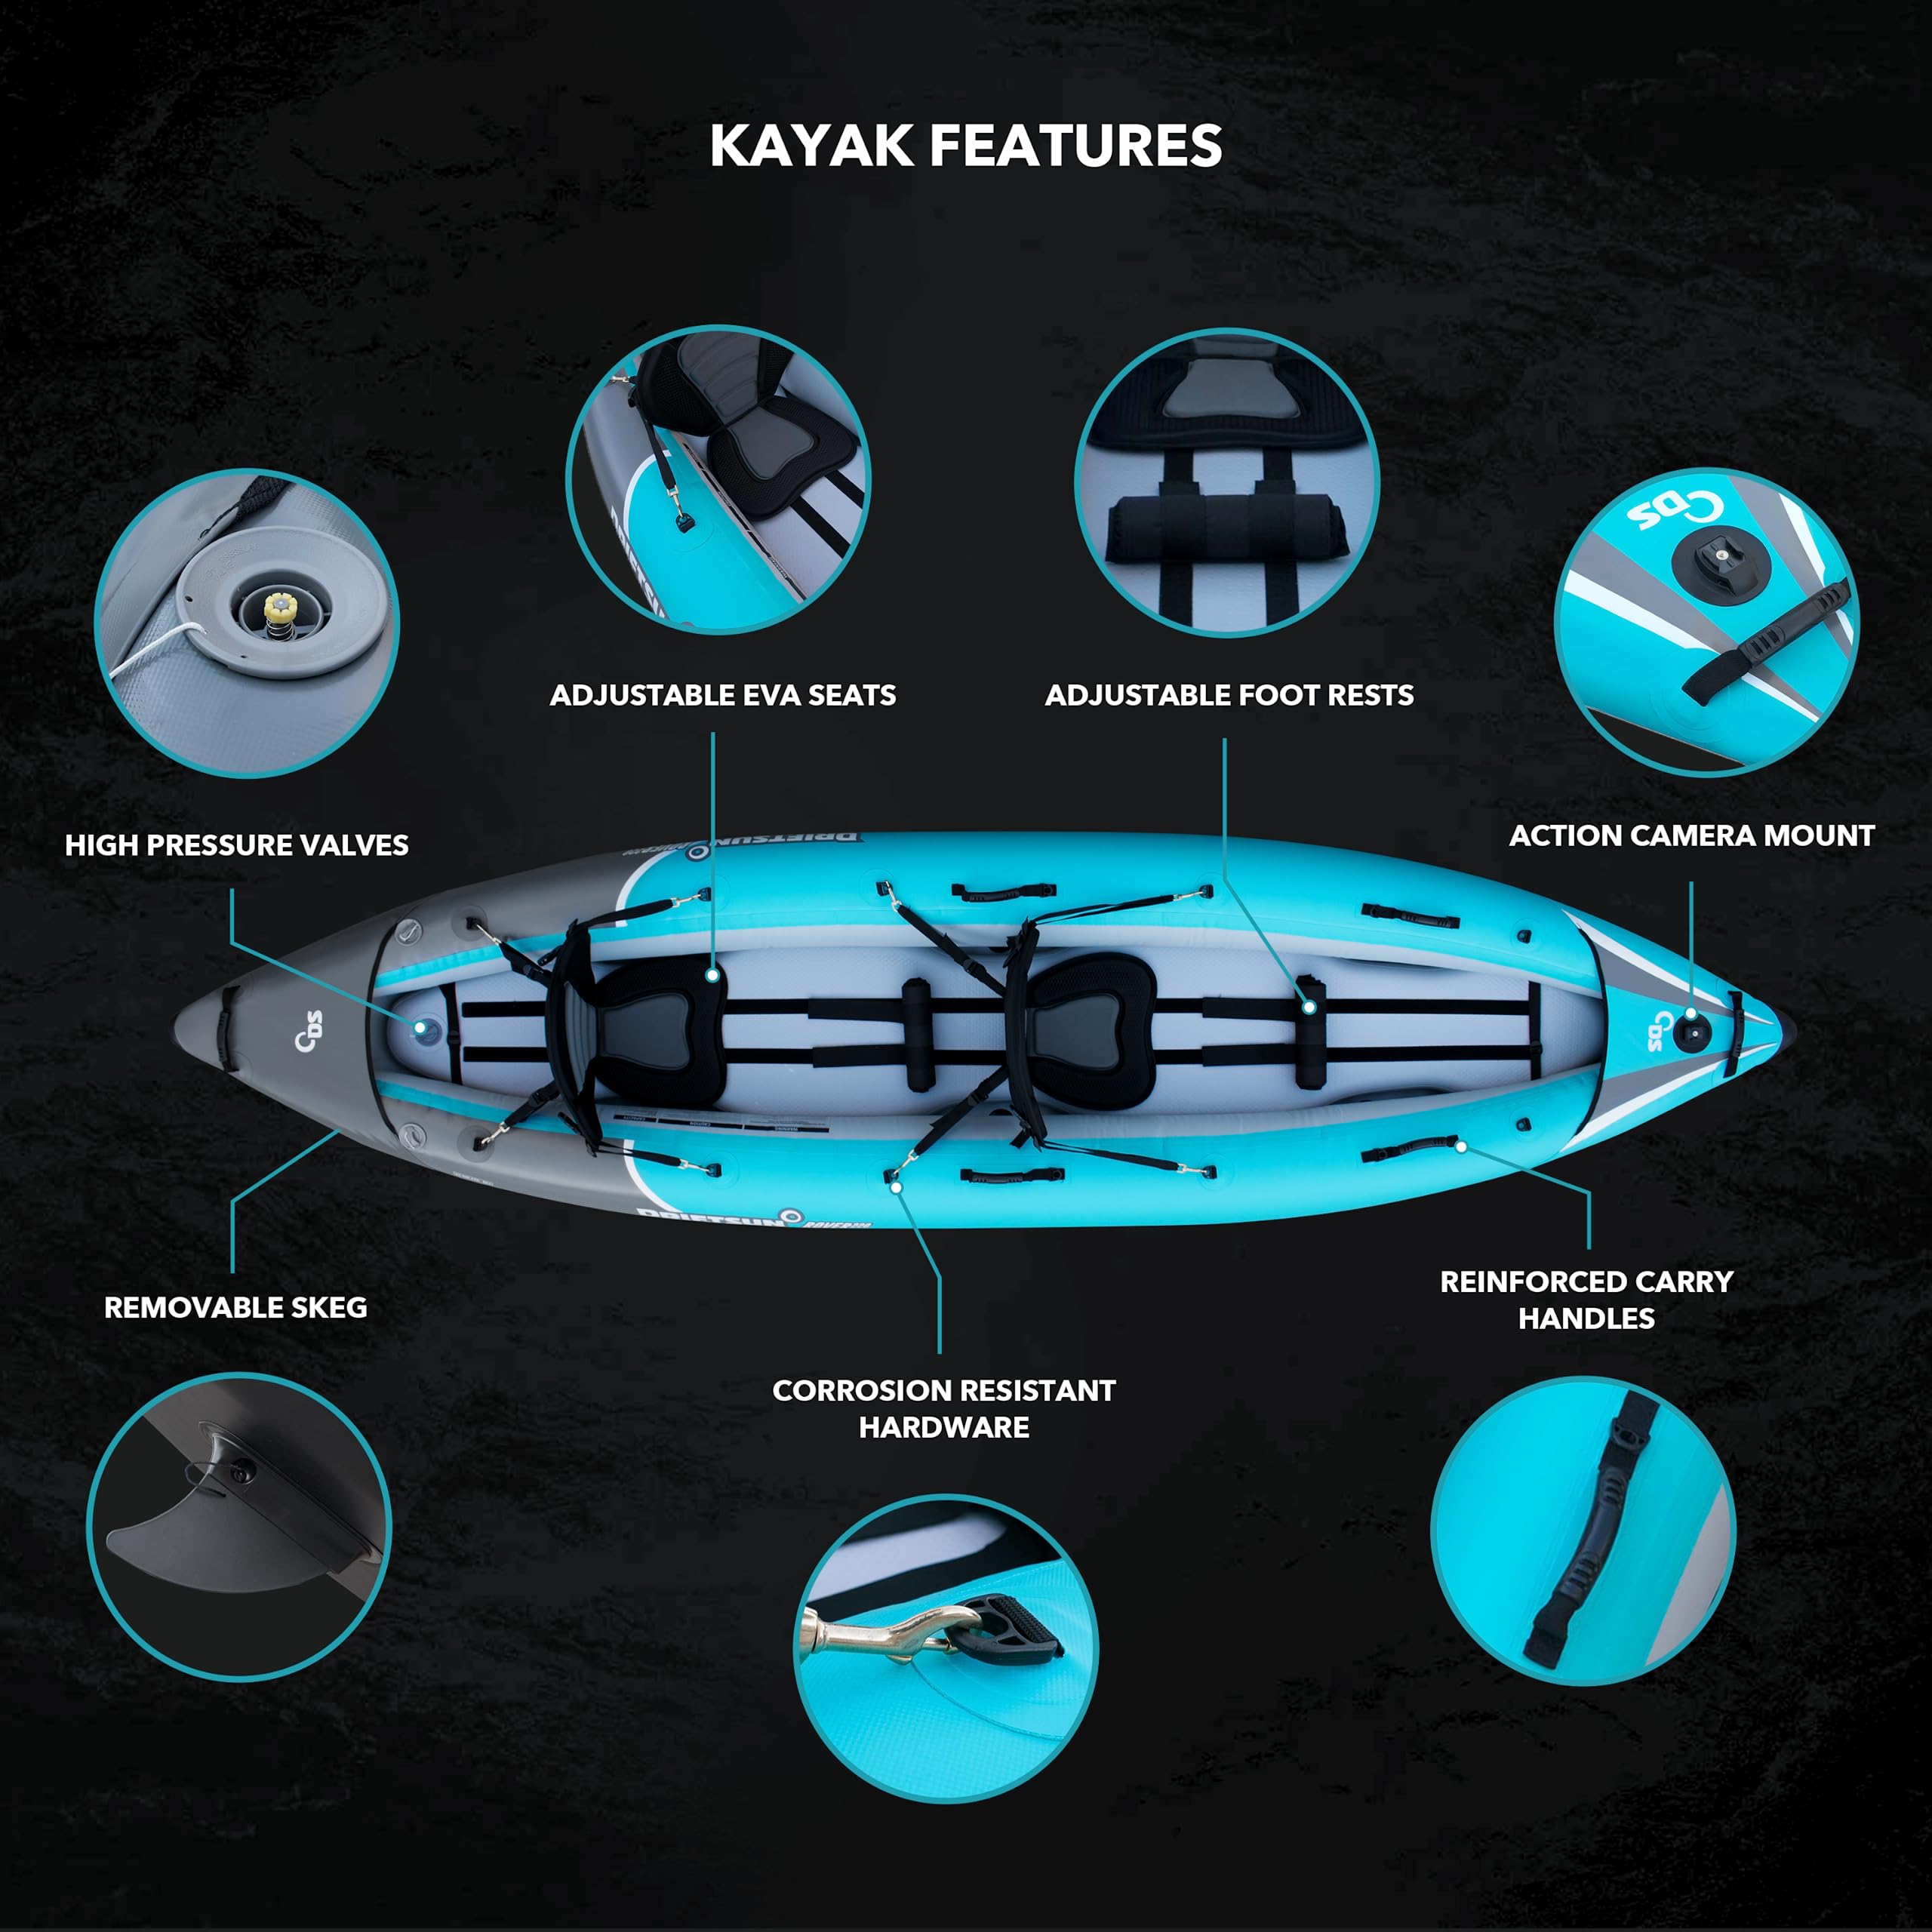 Driftsun Rover Inflatable Tandem Kayak - Driftsun Inflatable White Water Kayak - Inflatable 2 Person Kayak for Adults with High Pressure Floor, Padded Seats, Action Cam Mount, Aluminum Paddles, Pump